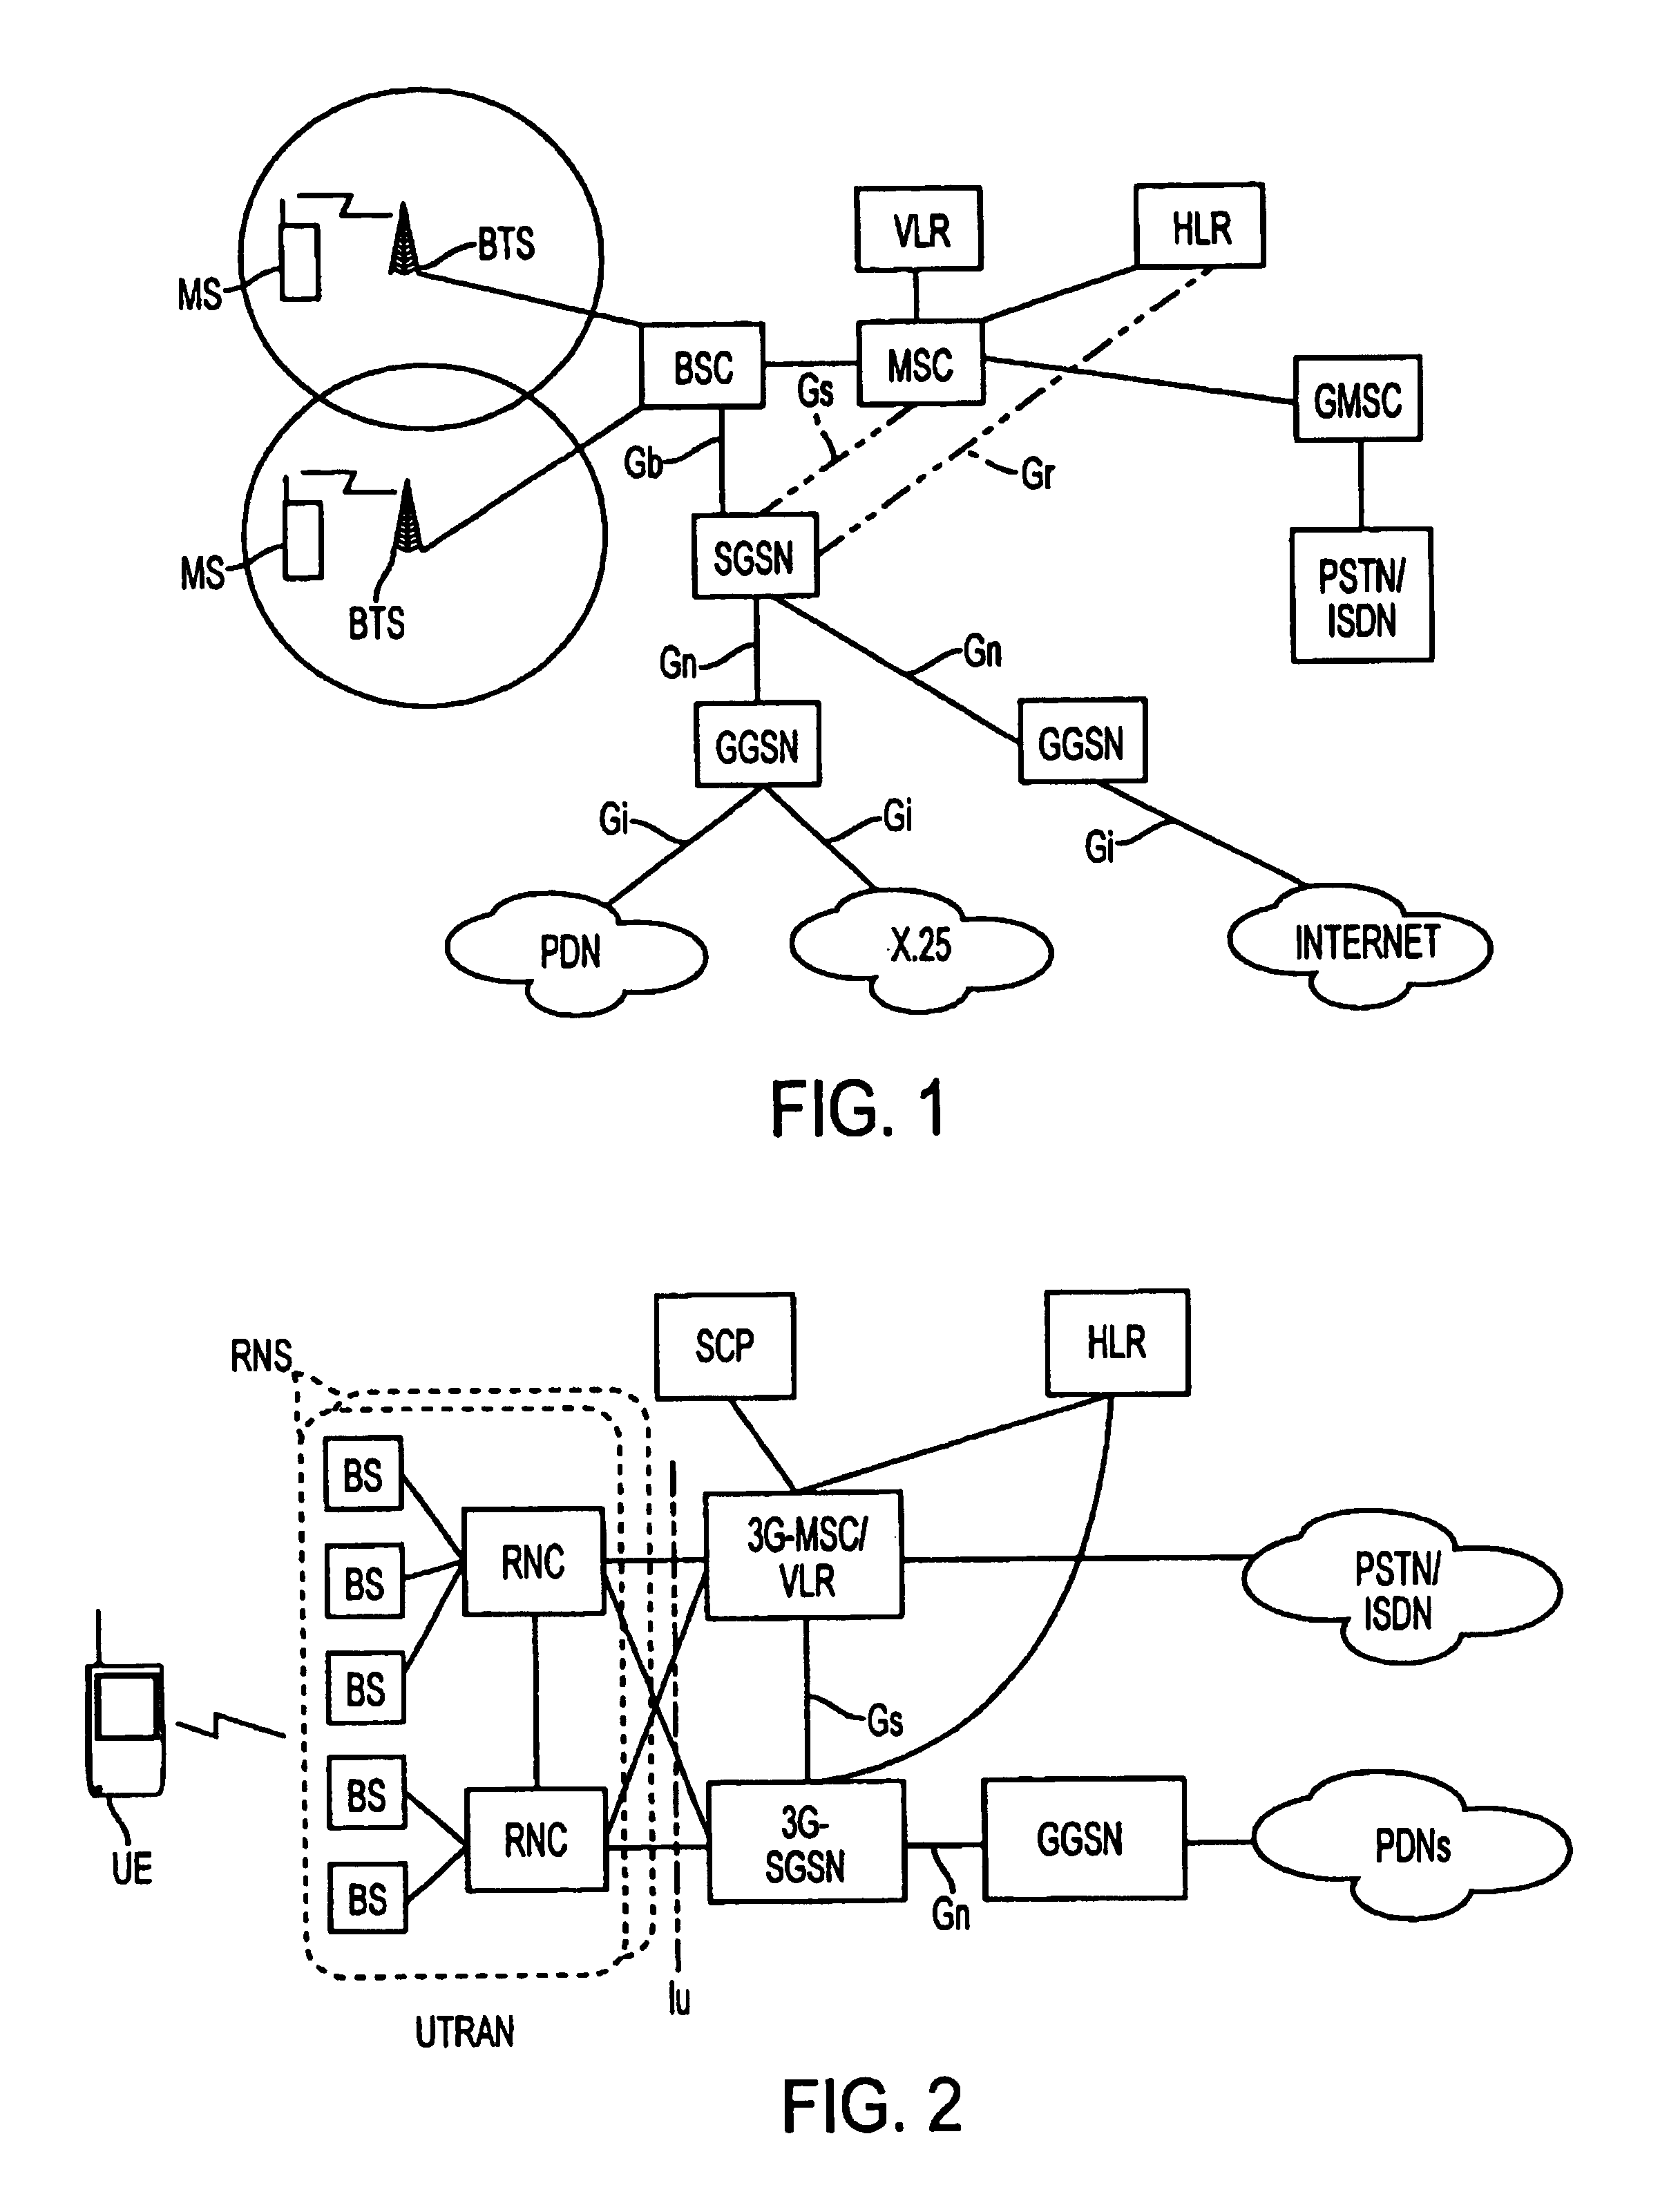 Data packet numbering in packet-switched data transmission